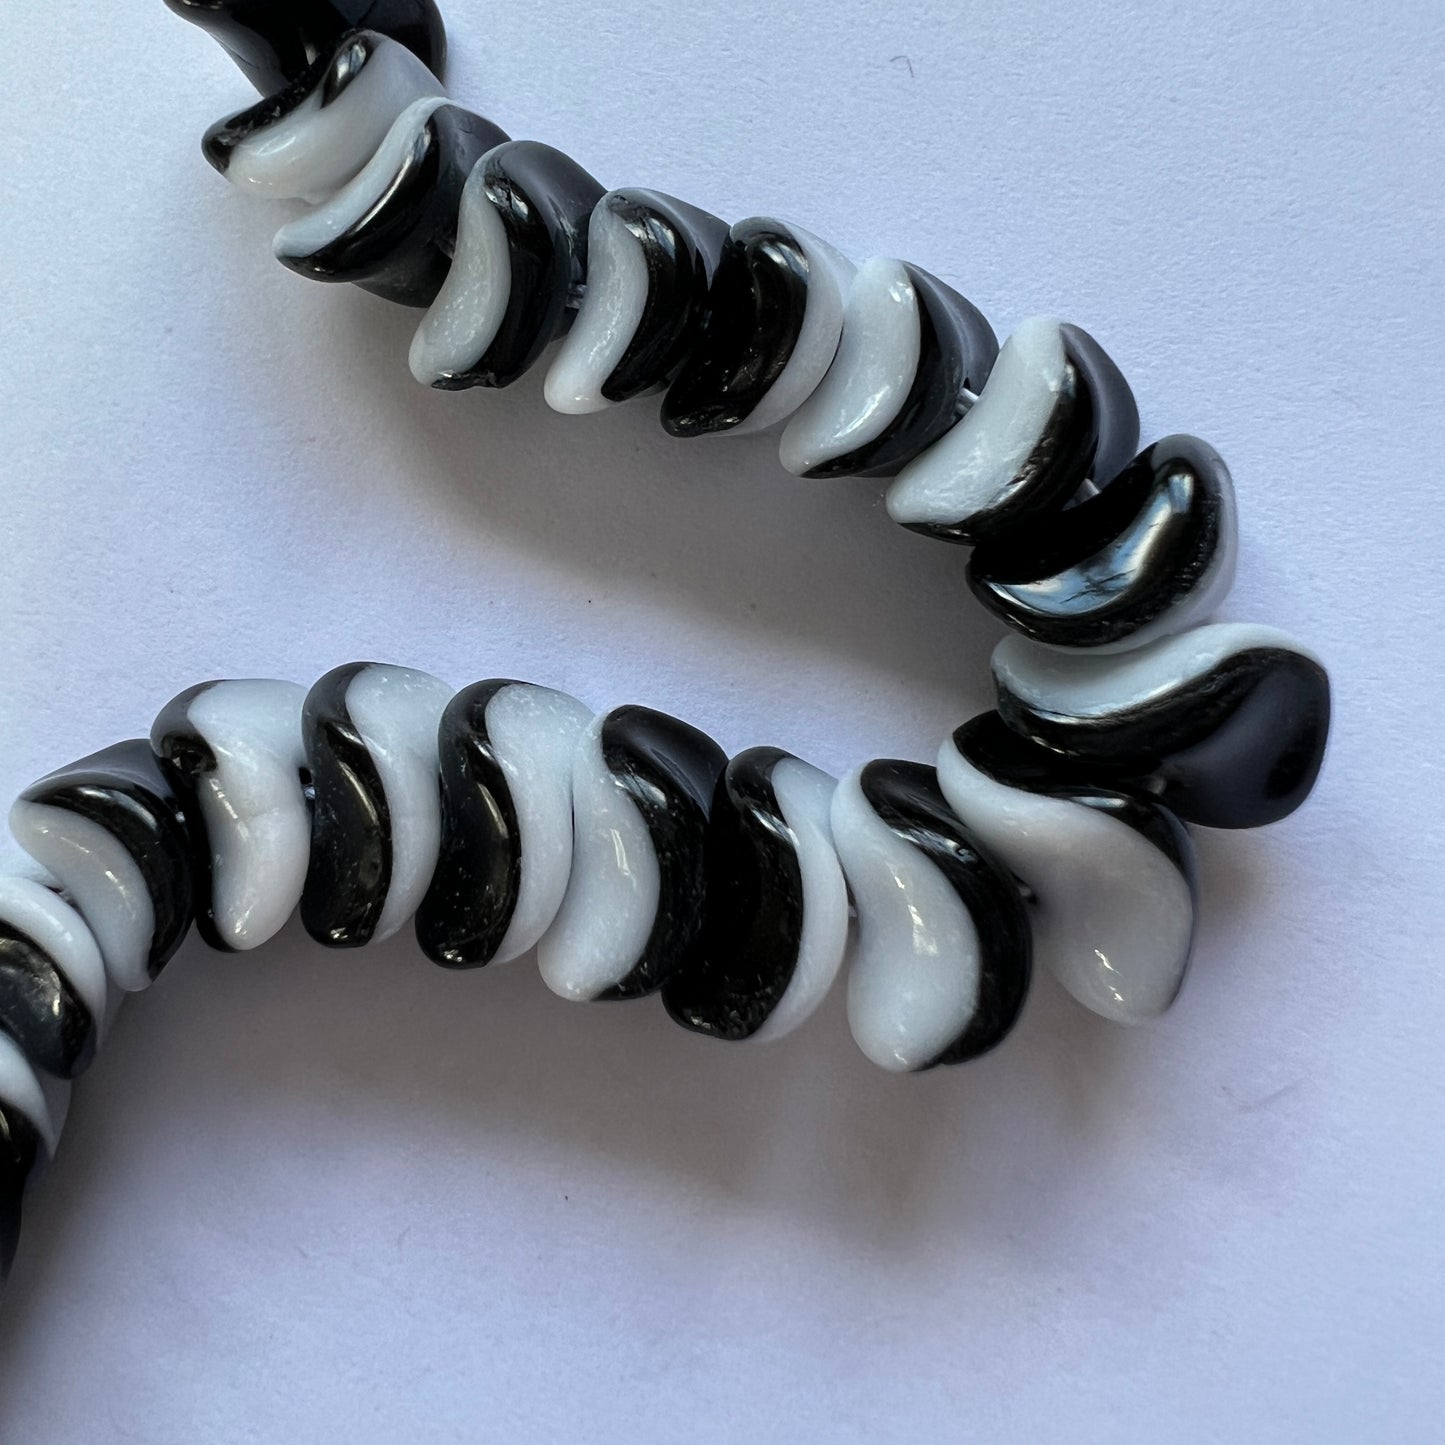 12mm x 8mm Czech Pressed Glass Twisted Spacer Black and White (Qty 12)